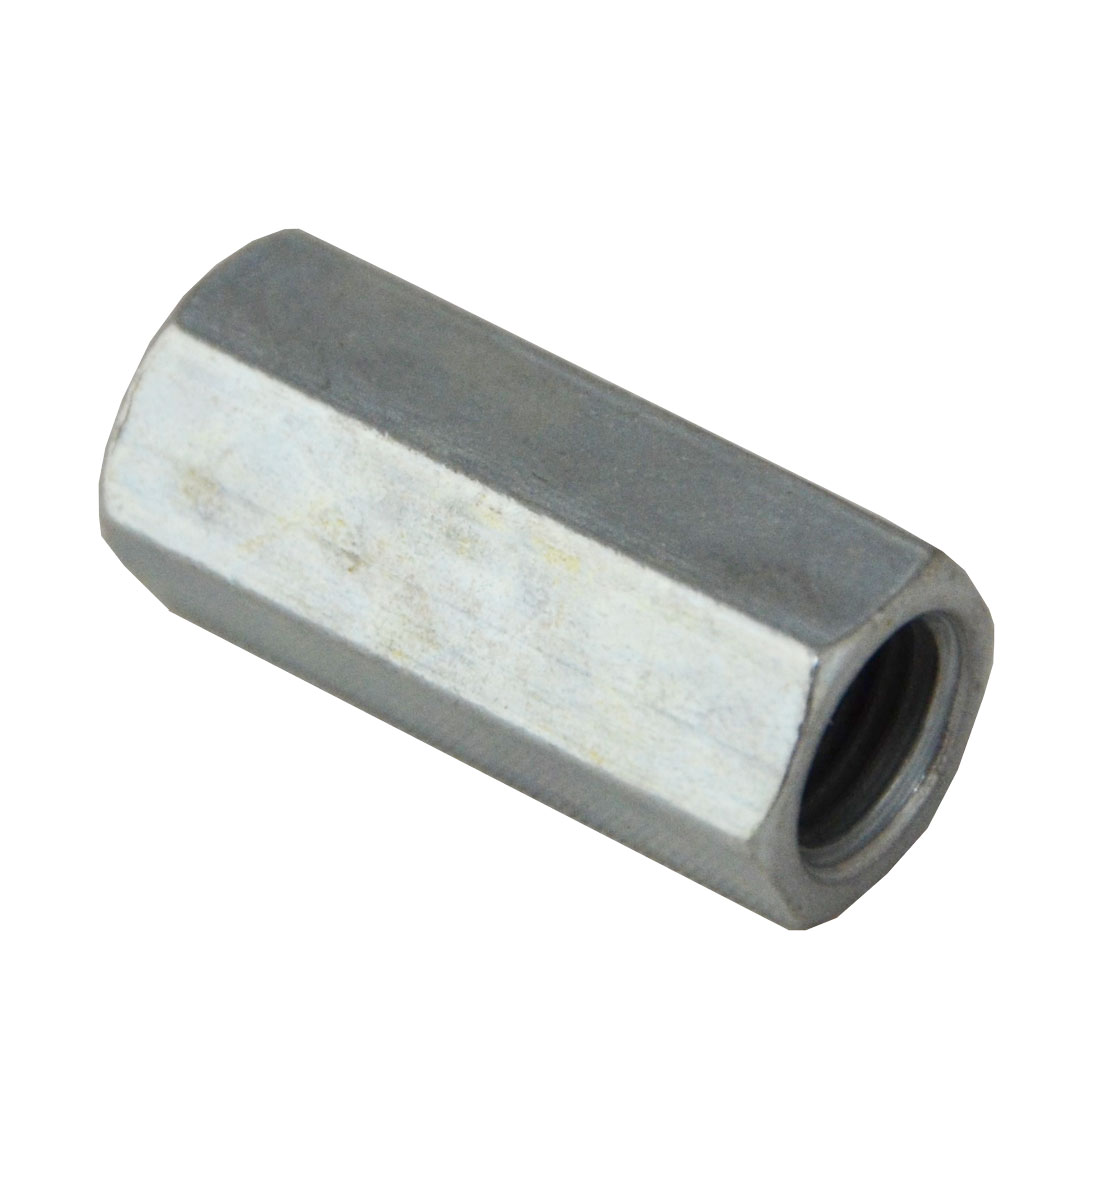 Female Brake Line Connector 3/8" UNF - Suitable for 3/16" Pipe